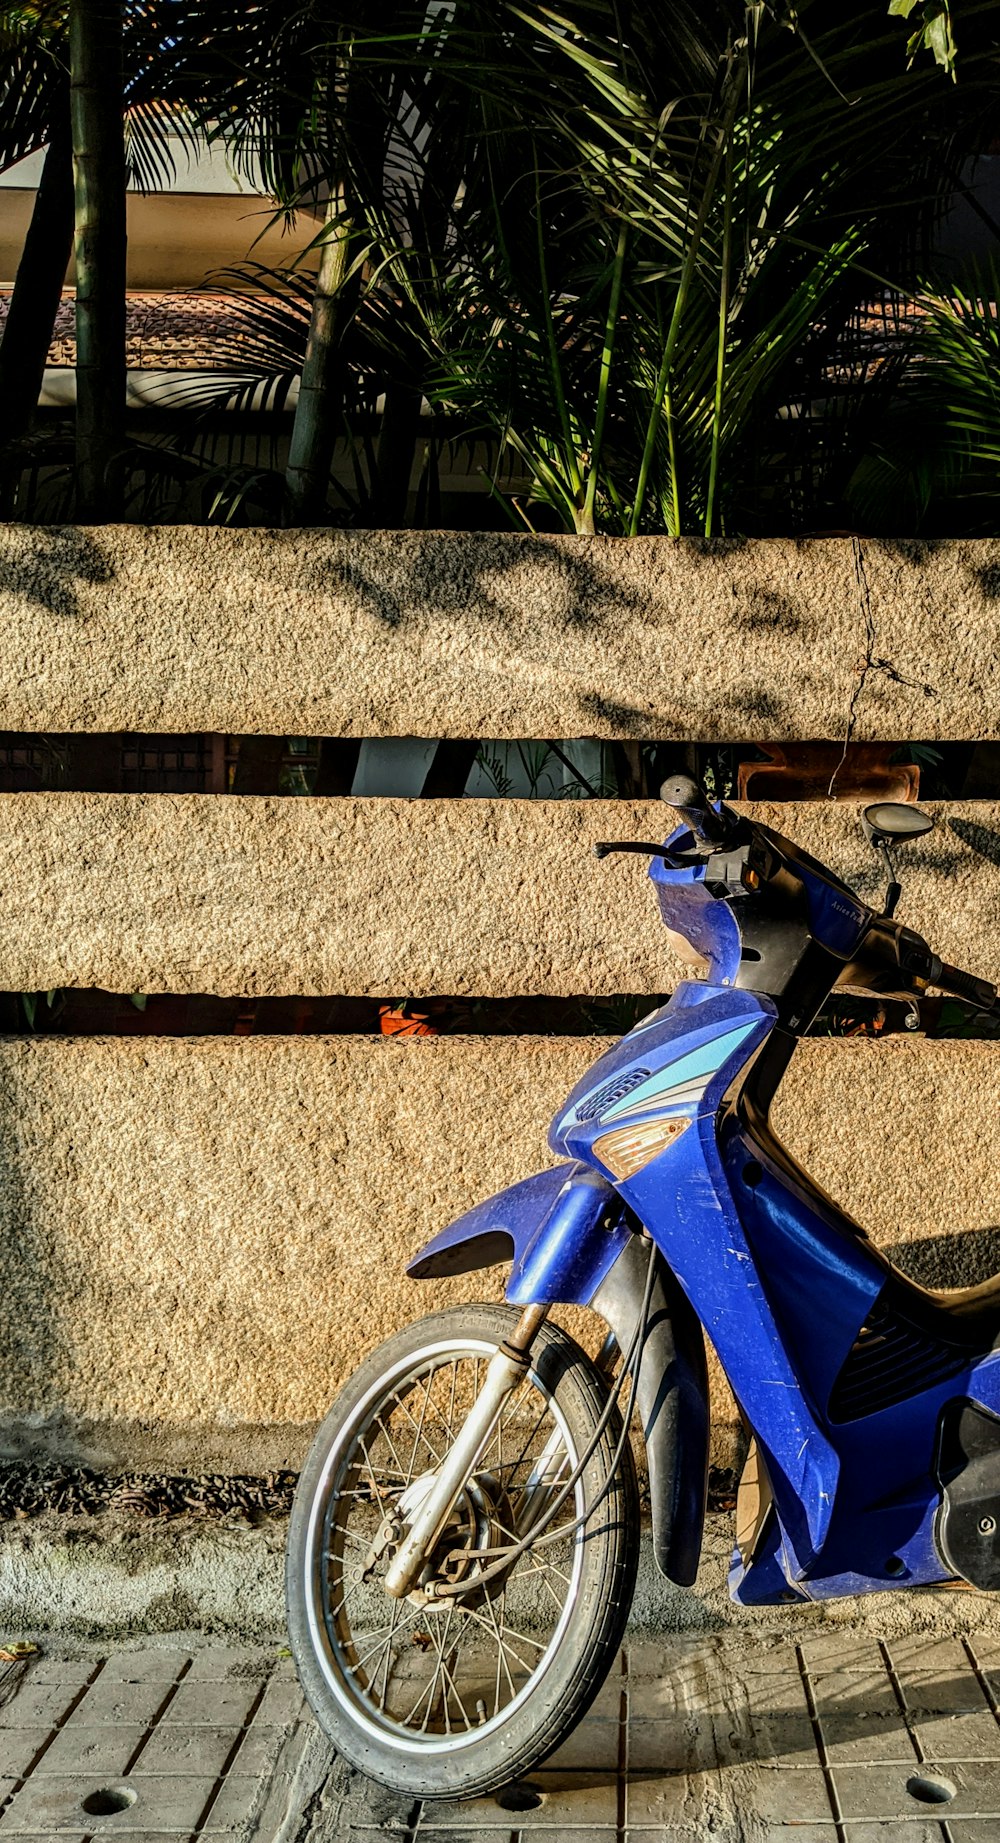 blue underbone motorcycle parked near fence